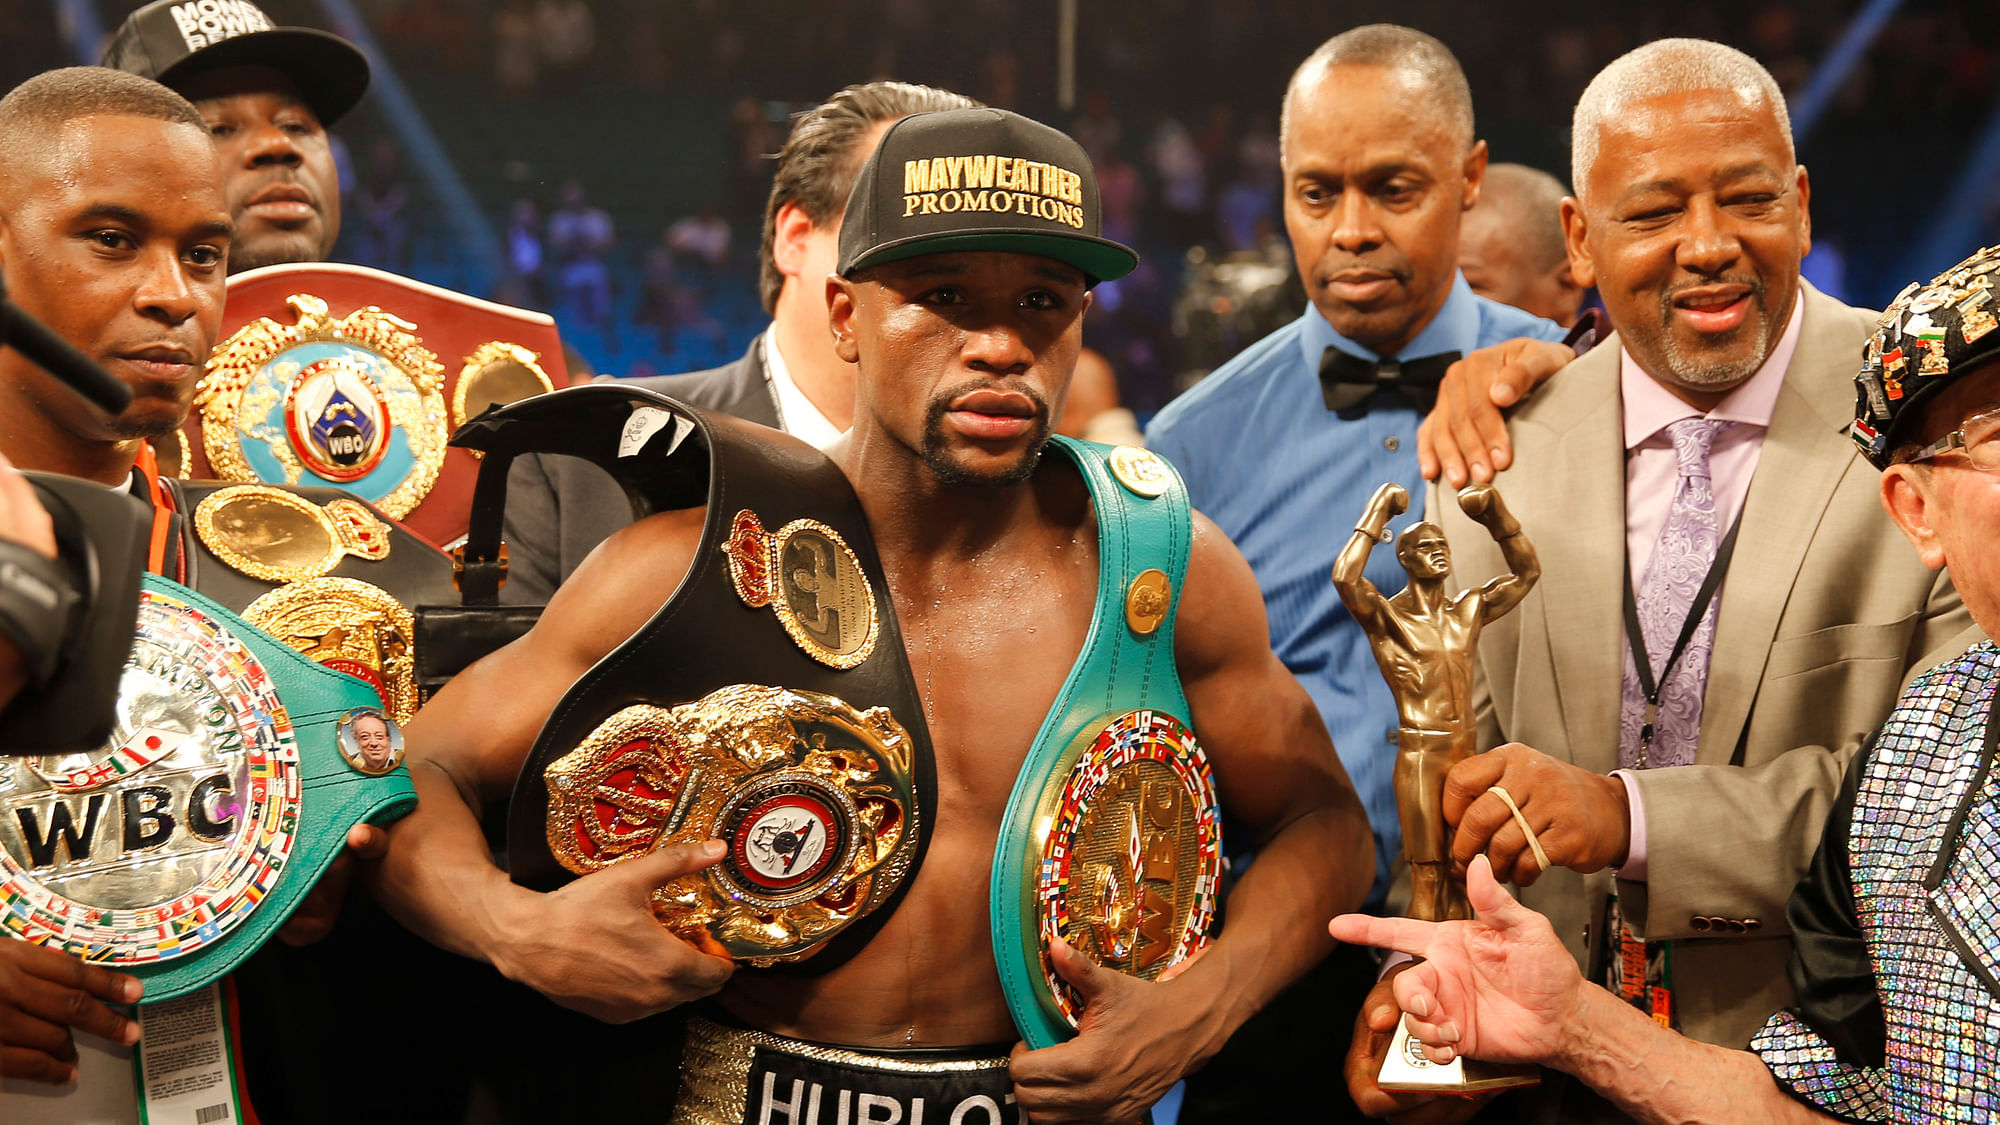 Floyd Mayweather says he was “blindsided” by promoters of the proposed New Year’s Eve event.